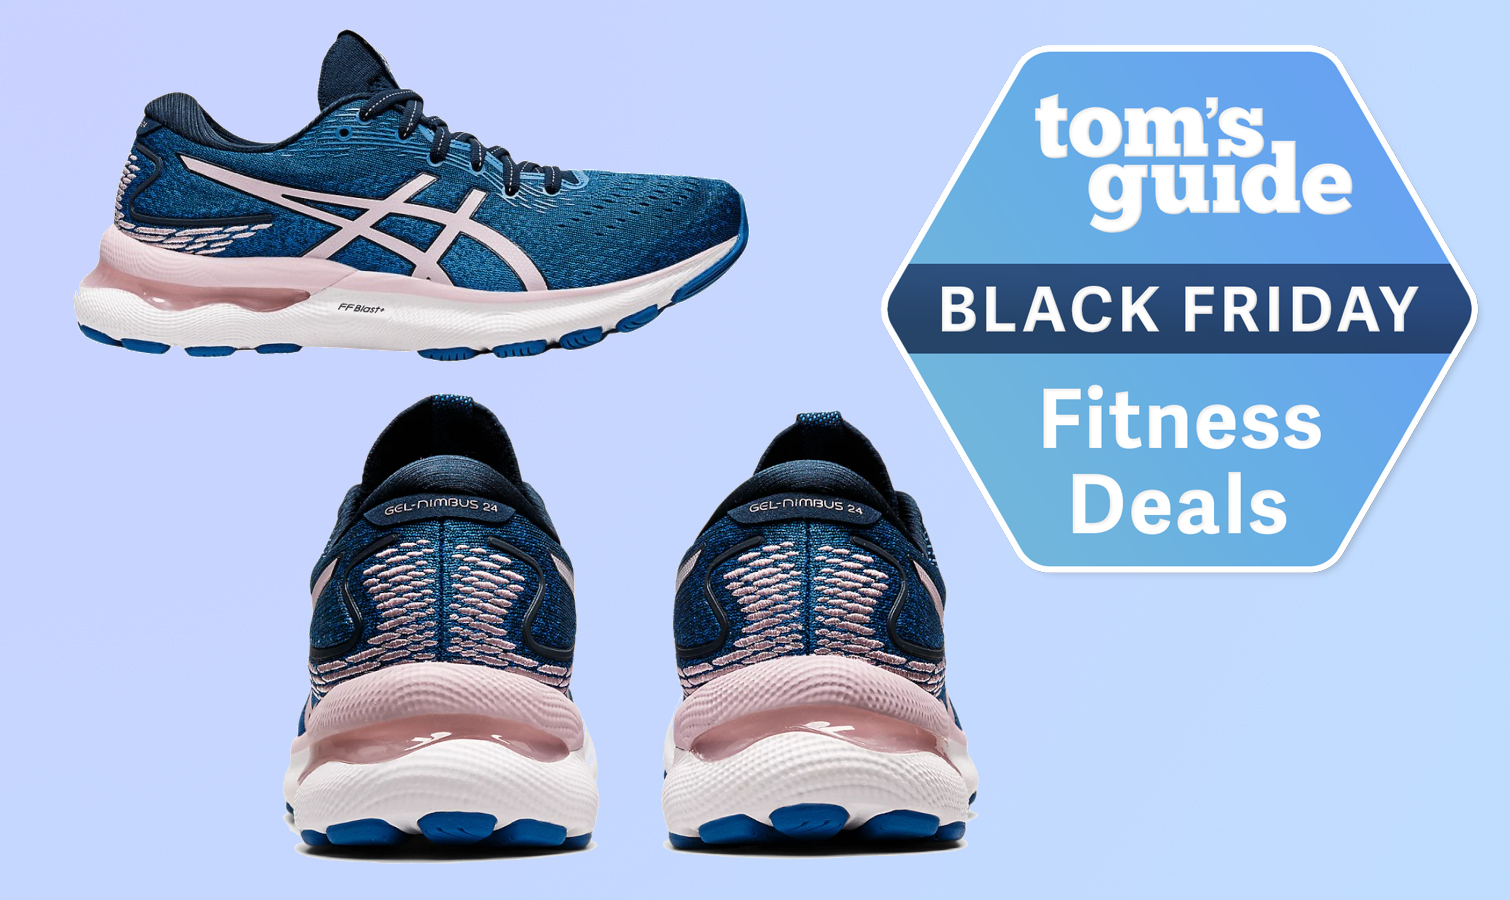 Run don't walk! My favorite cushioned running shoe from Asics is $62 off  for Black Friday | Tom's Guide